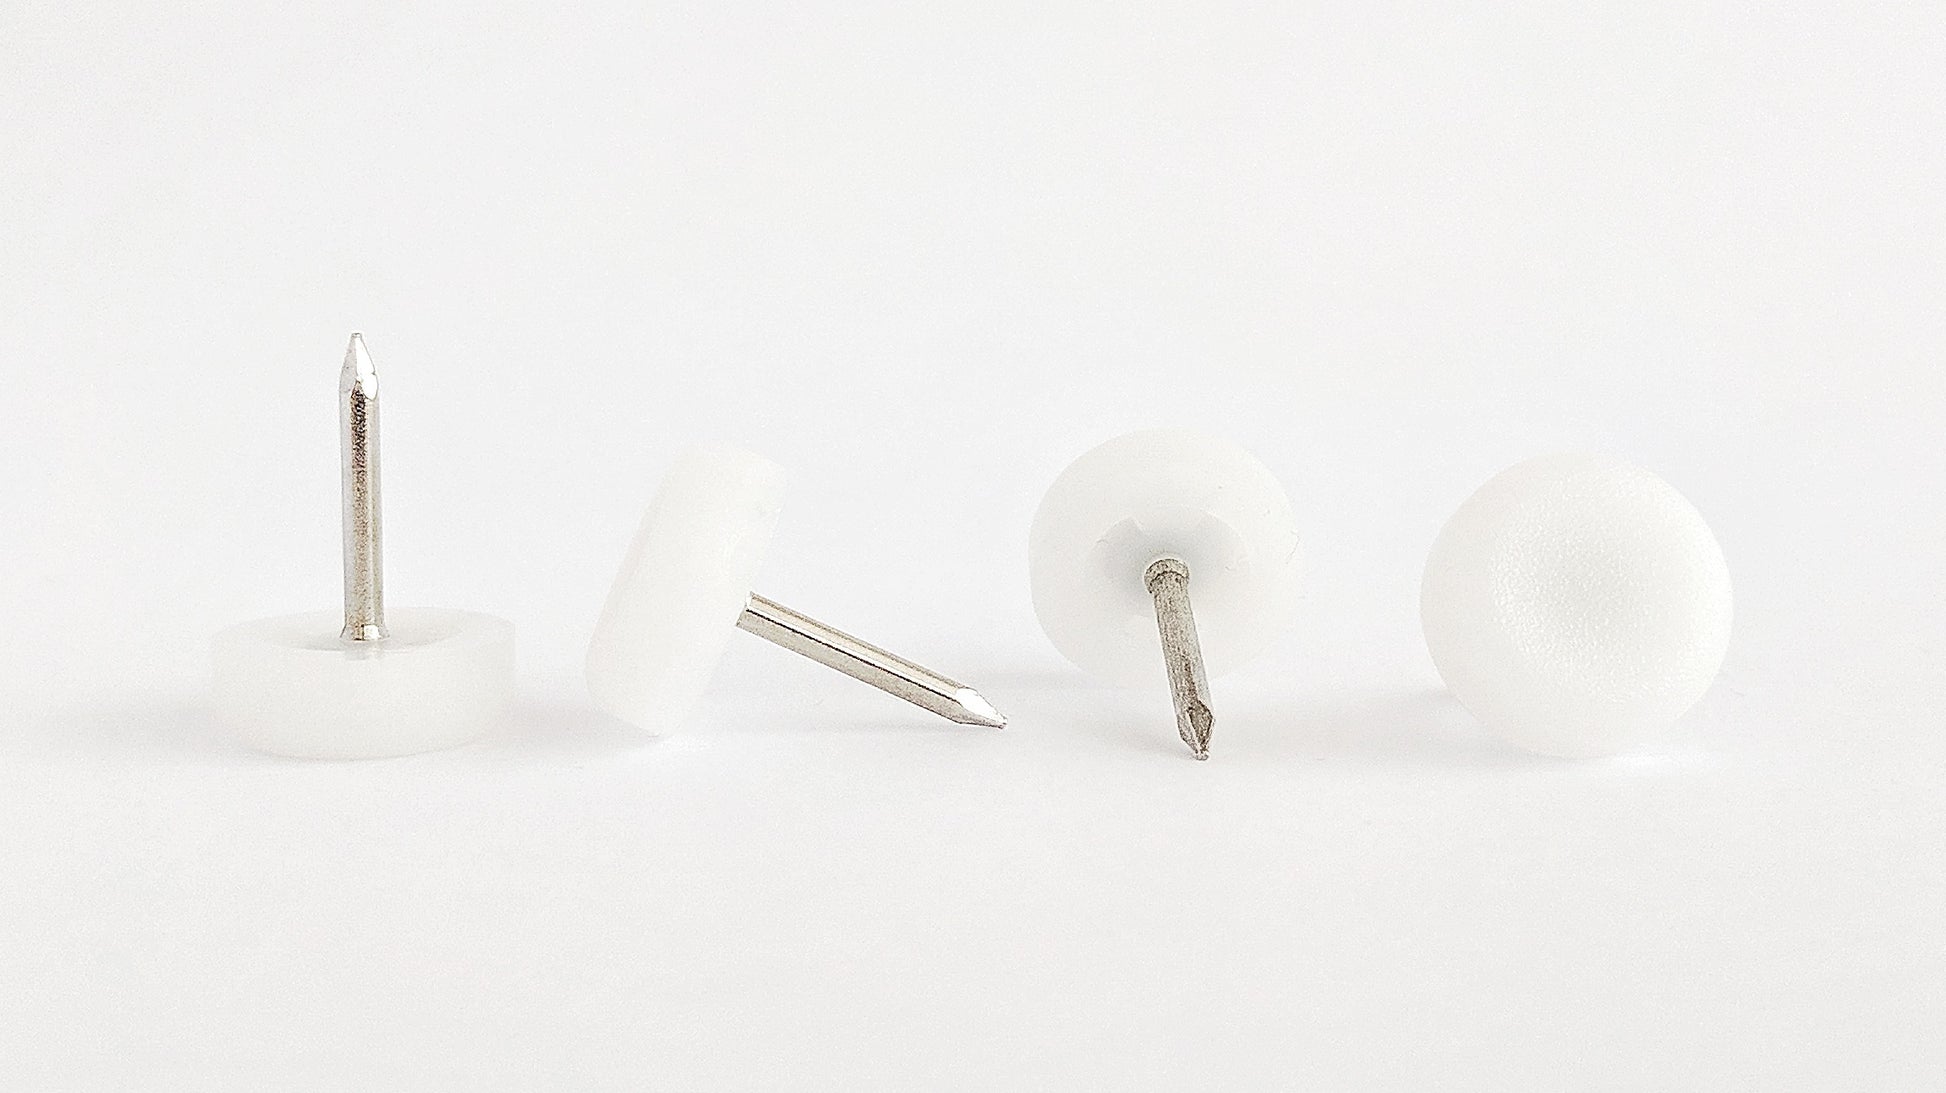 15mm White Plastic Nail On Gliders - Made in Germany - Keay Vital Parts